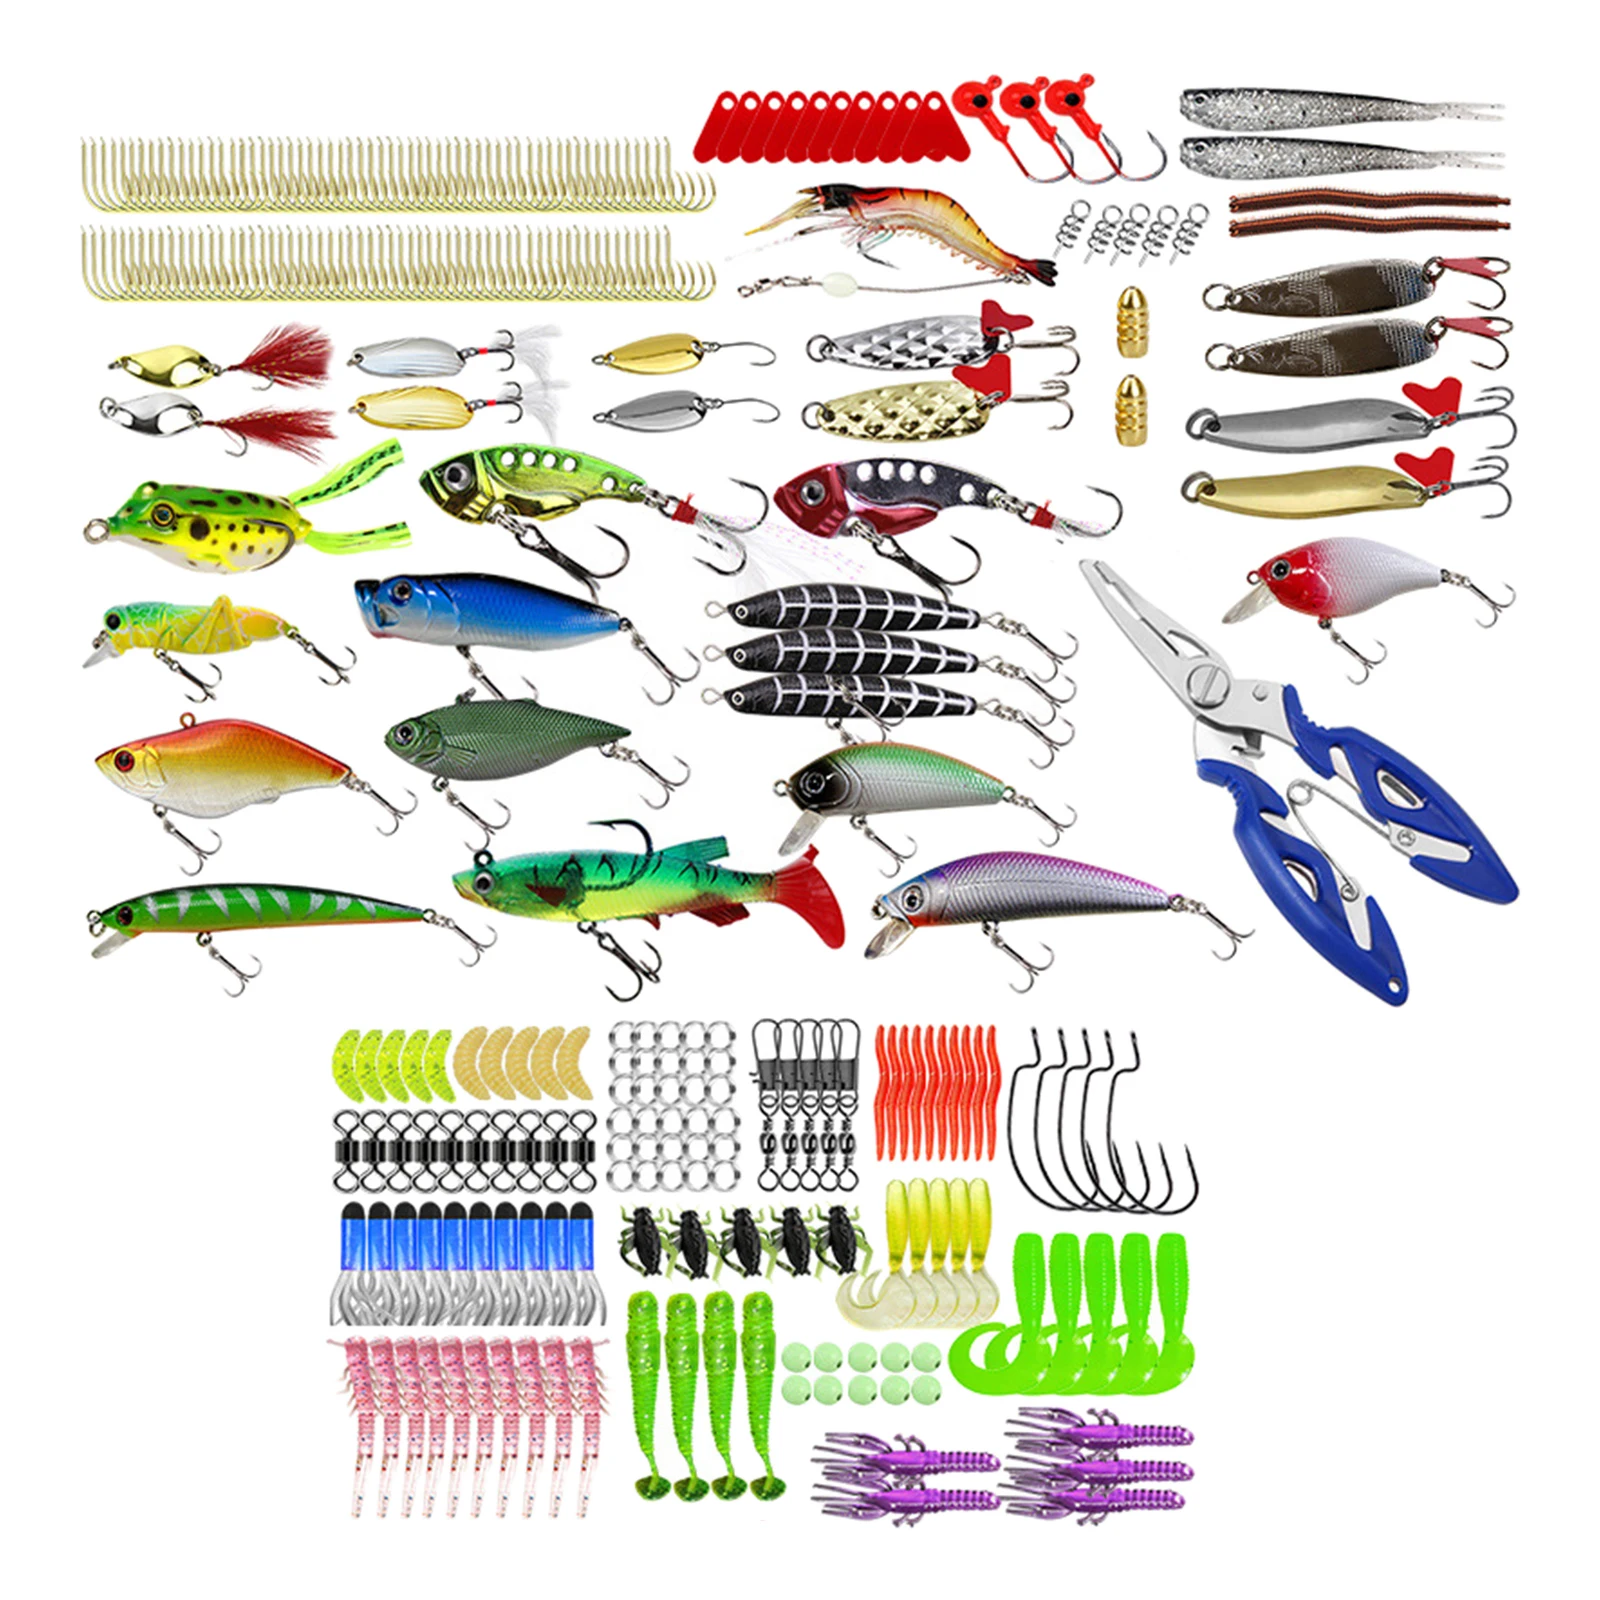 300pcs Fishing Lures Kit Set for Bass,Trout,Salmon,Including Spinning Lures, Plastic Worms, Frogs, Single Hooks, Swivels